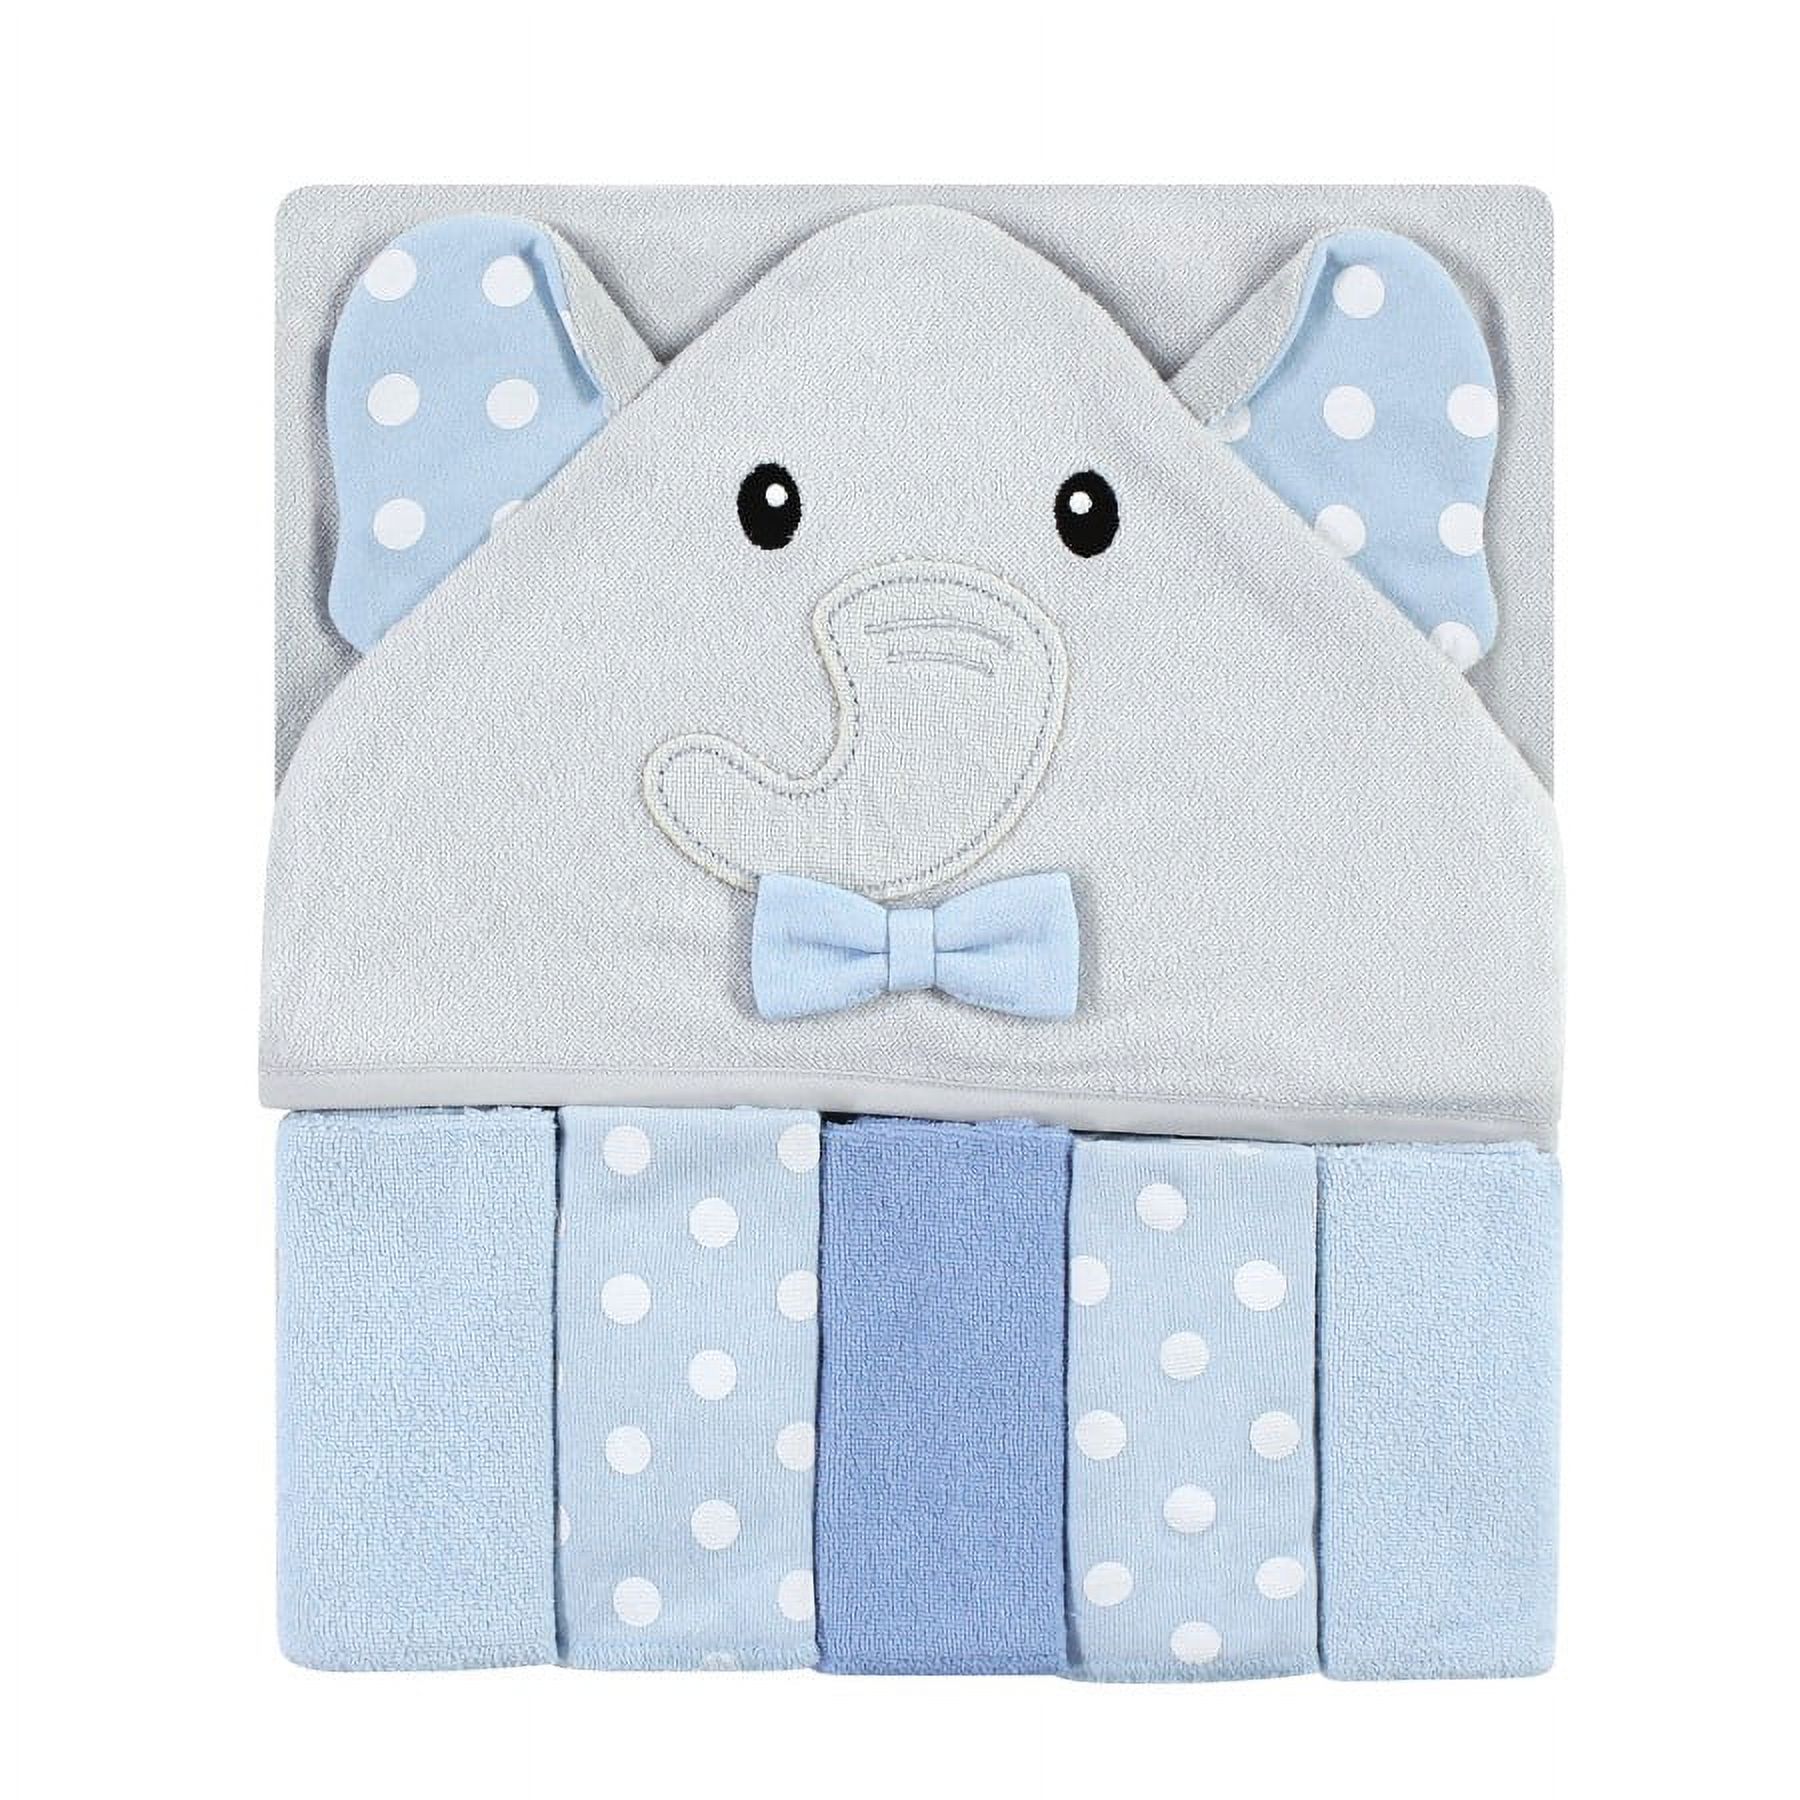 Hudson Baby Infant Boy Hooded Towel and Five Washcloths, White Dots Gray Elephant, One Size - image 1 of 2